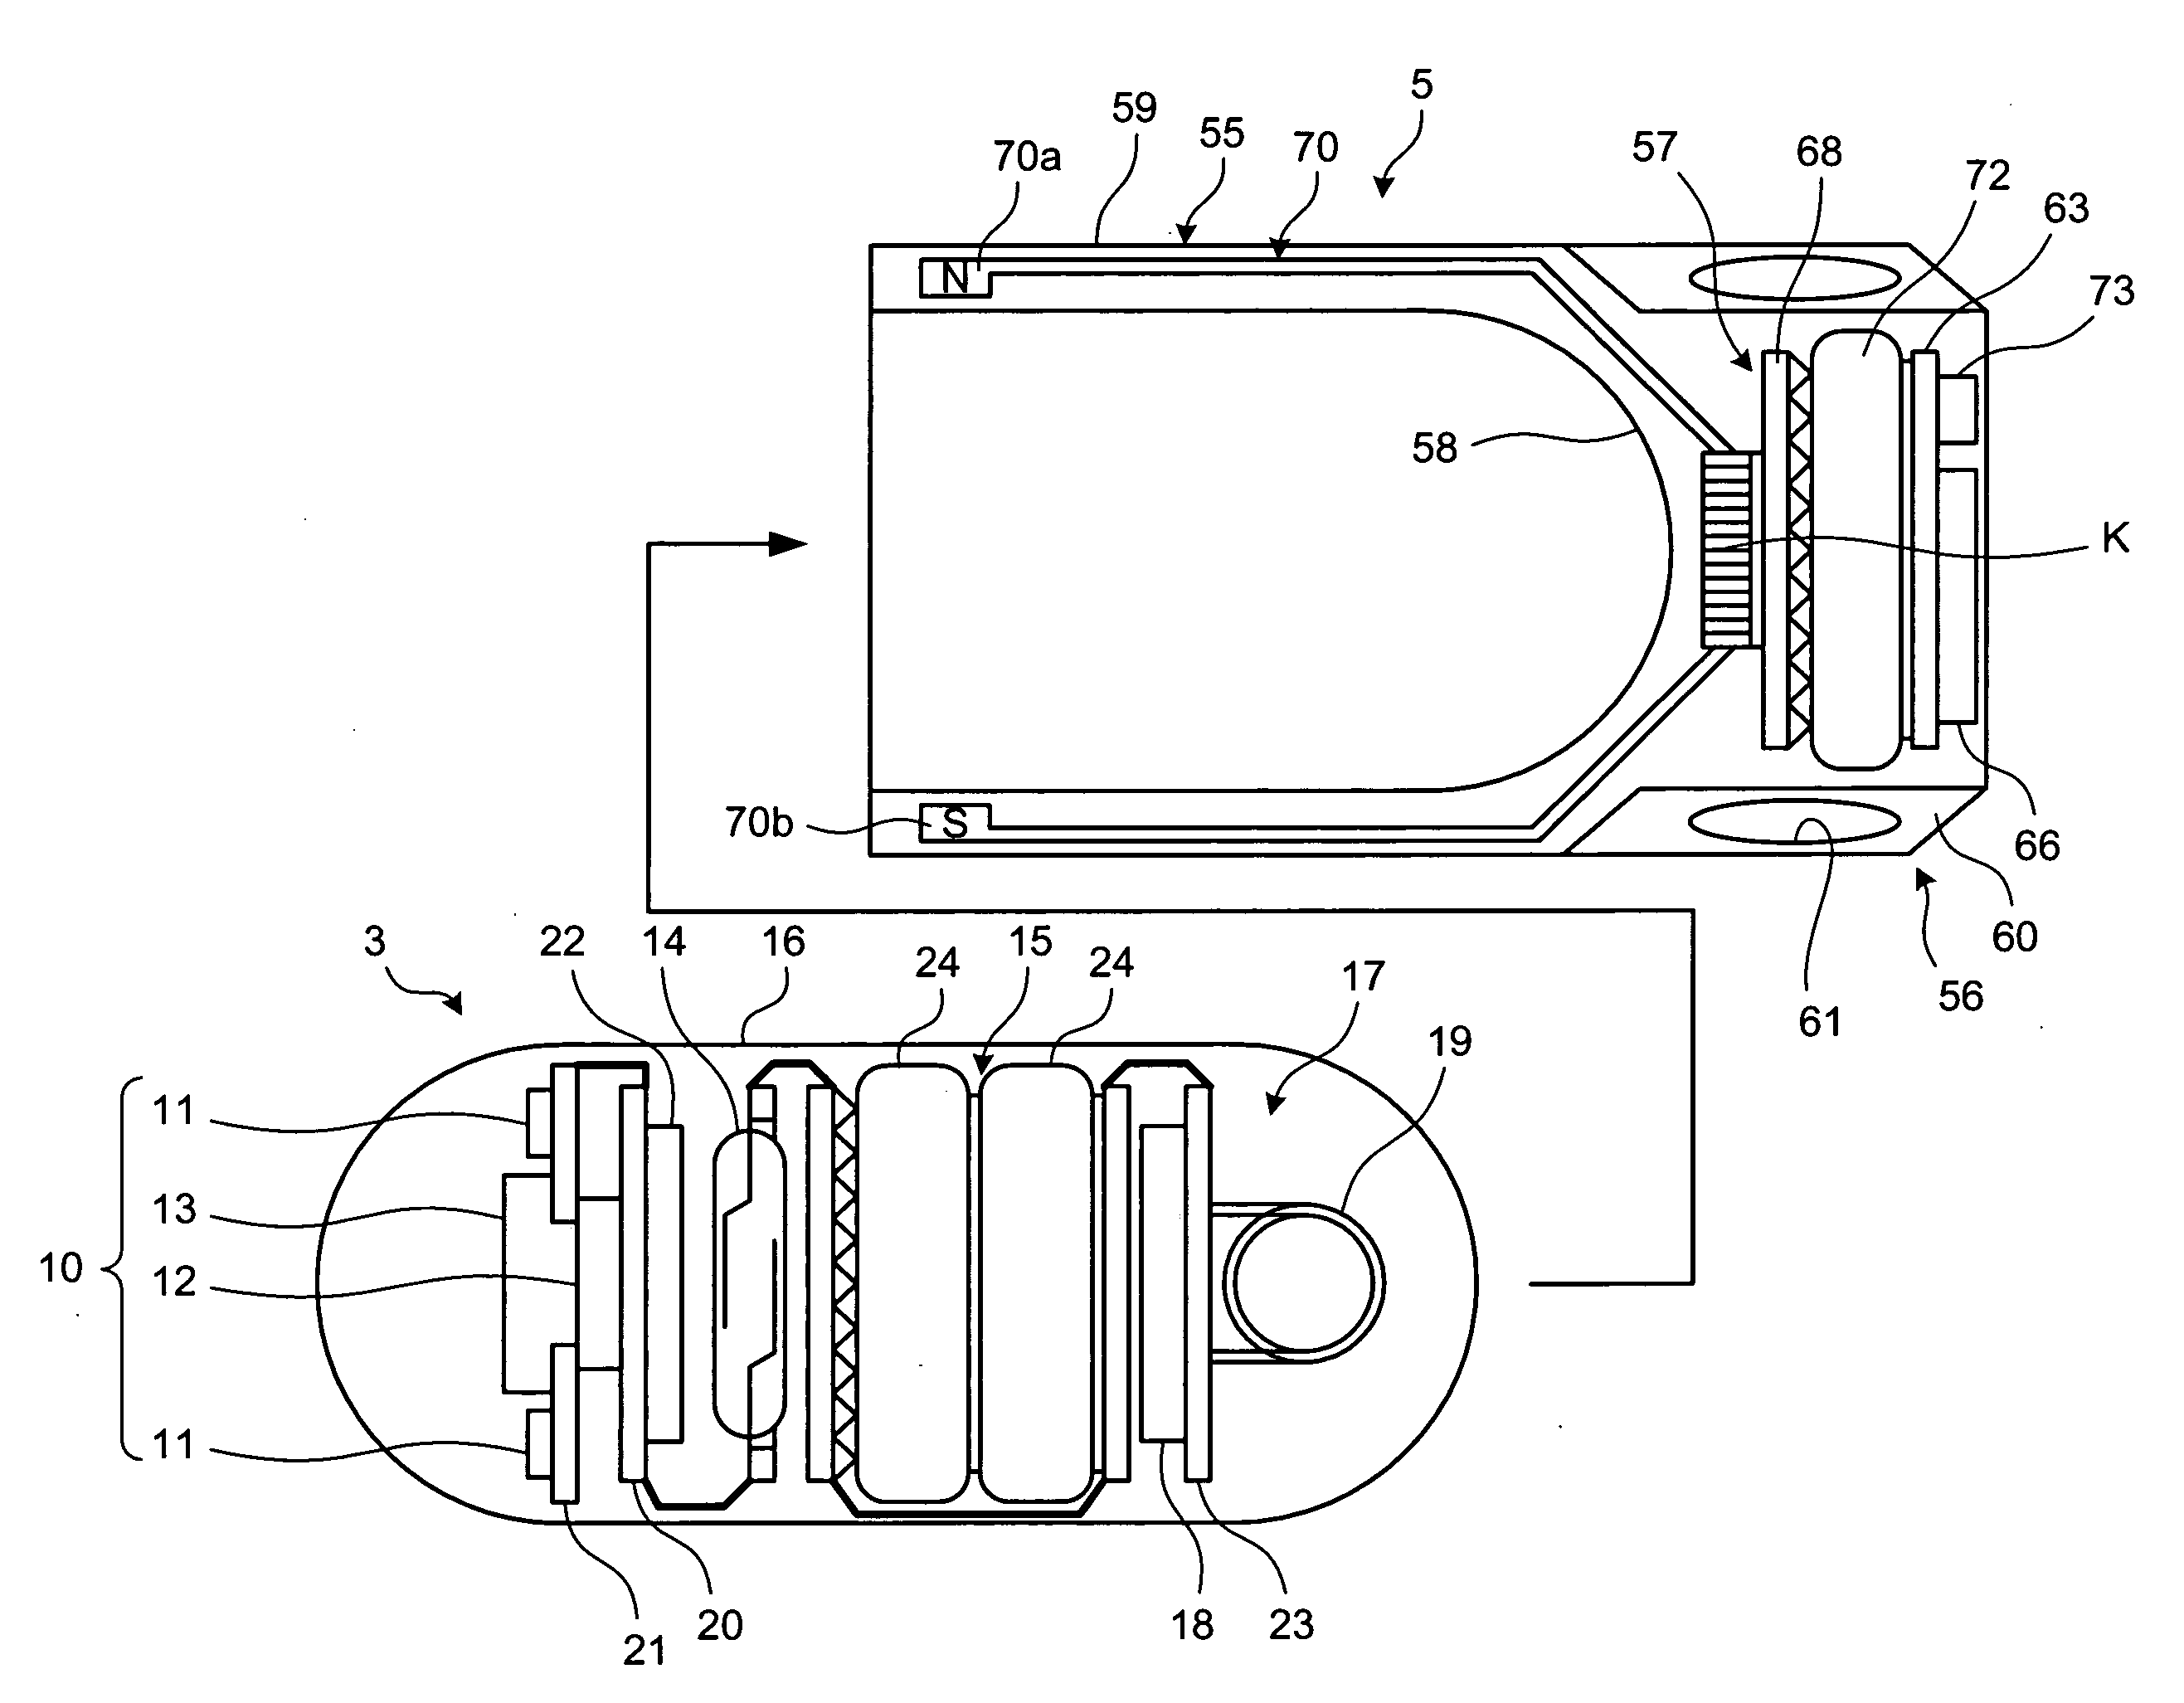 Indwelling Apparatus for Body Cavity Introducing Device and Body Cavity Introducing Device Placing System